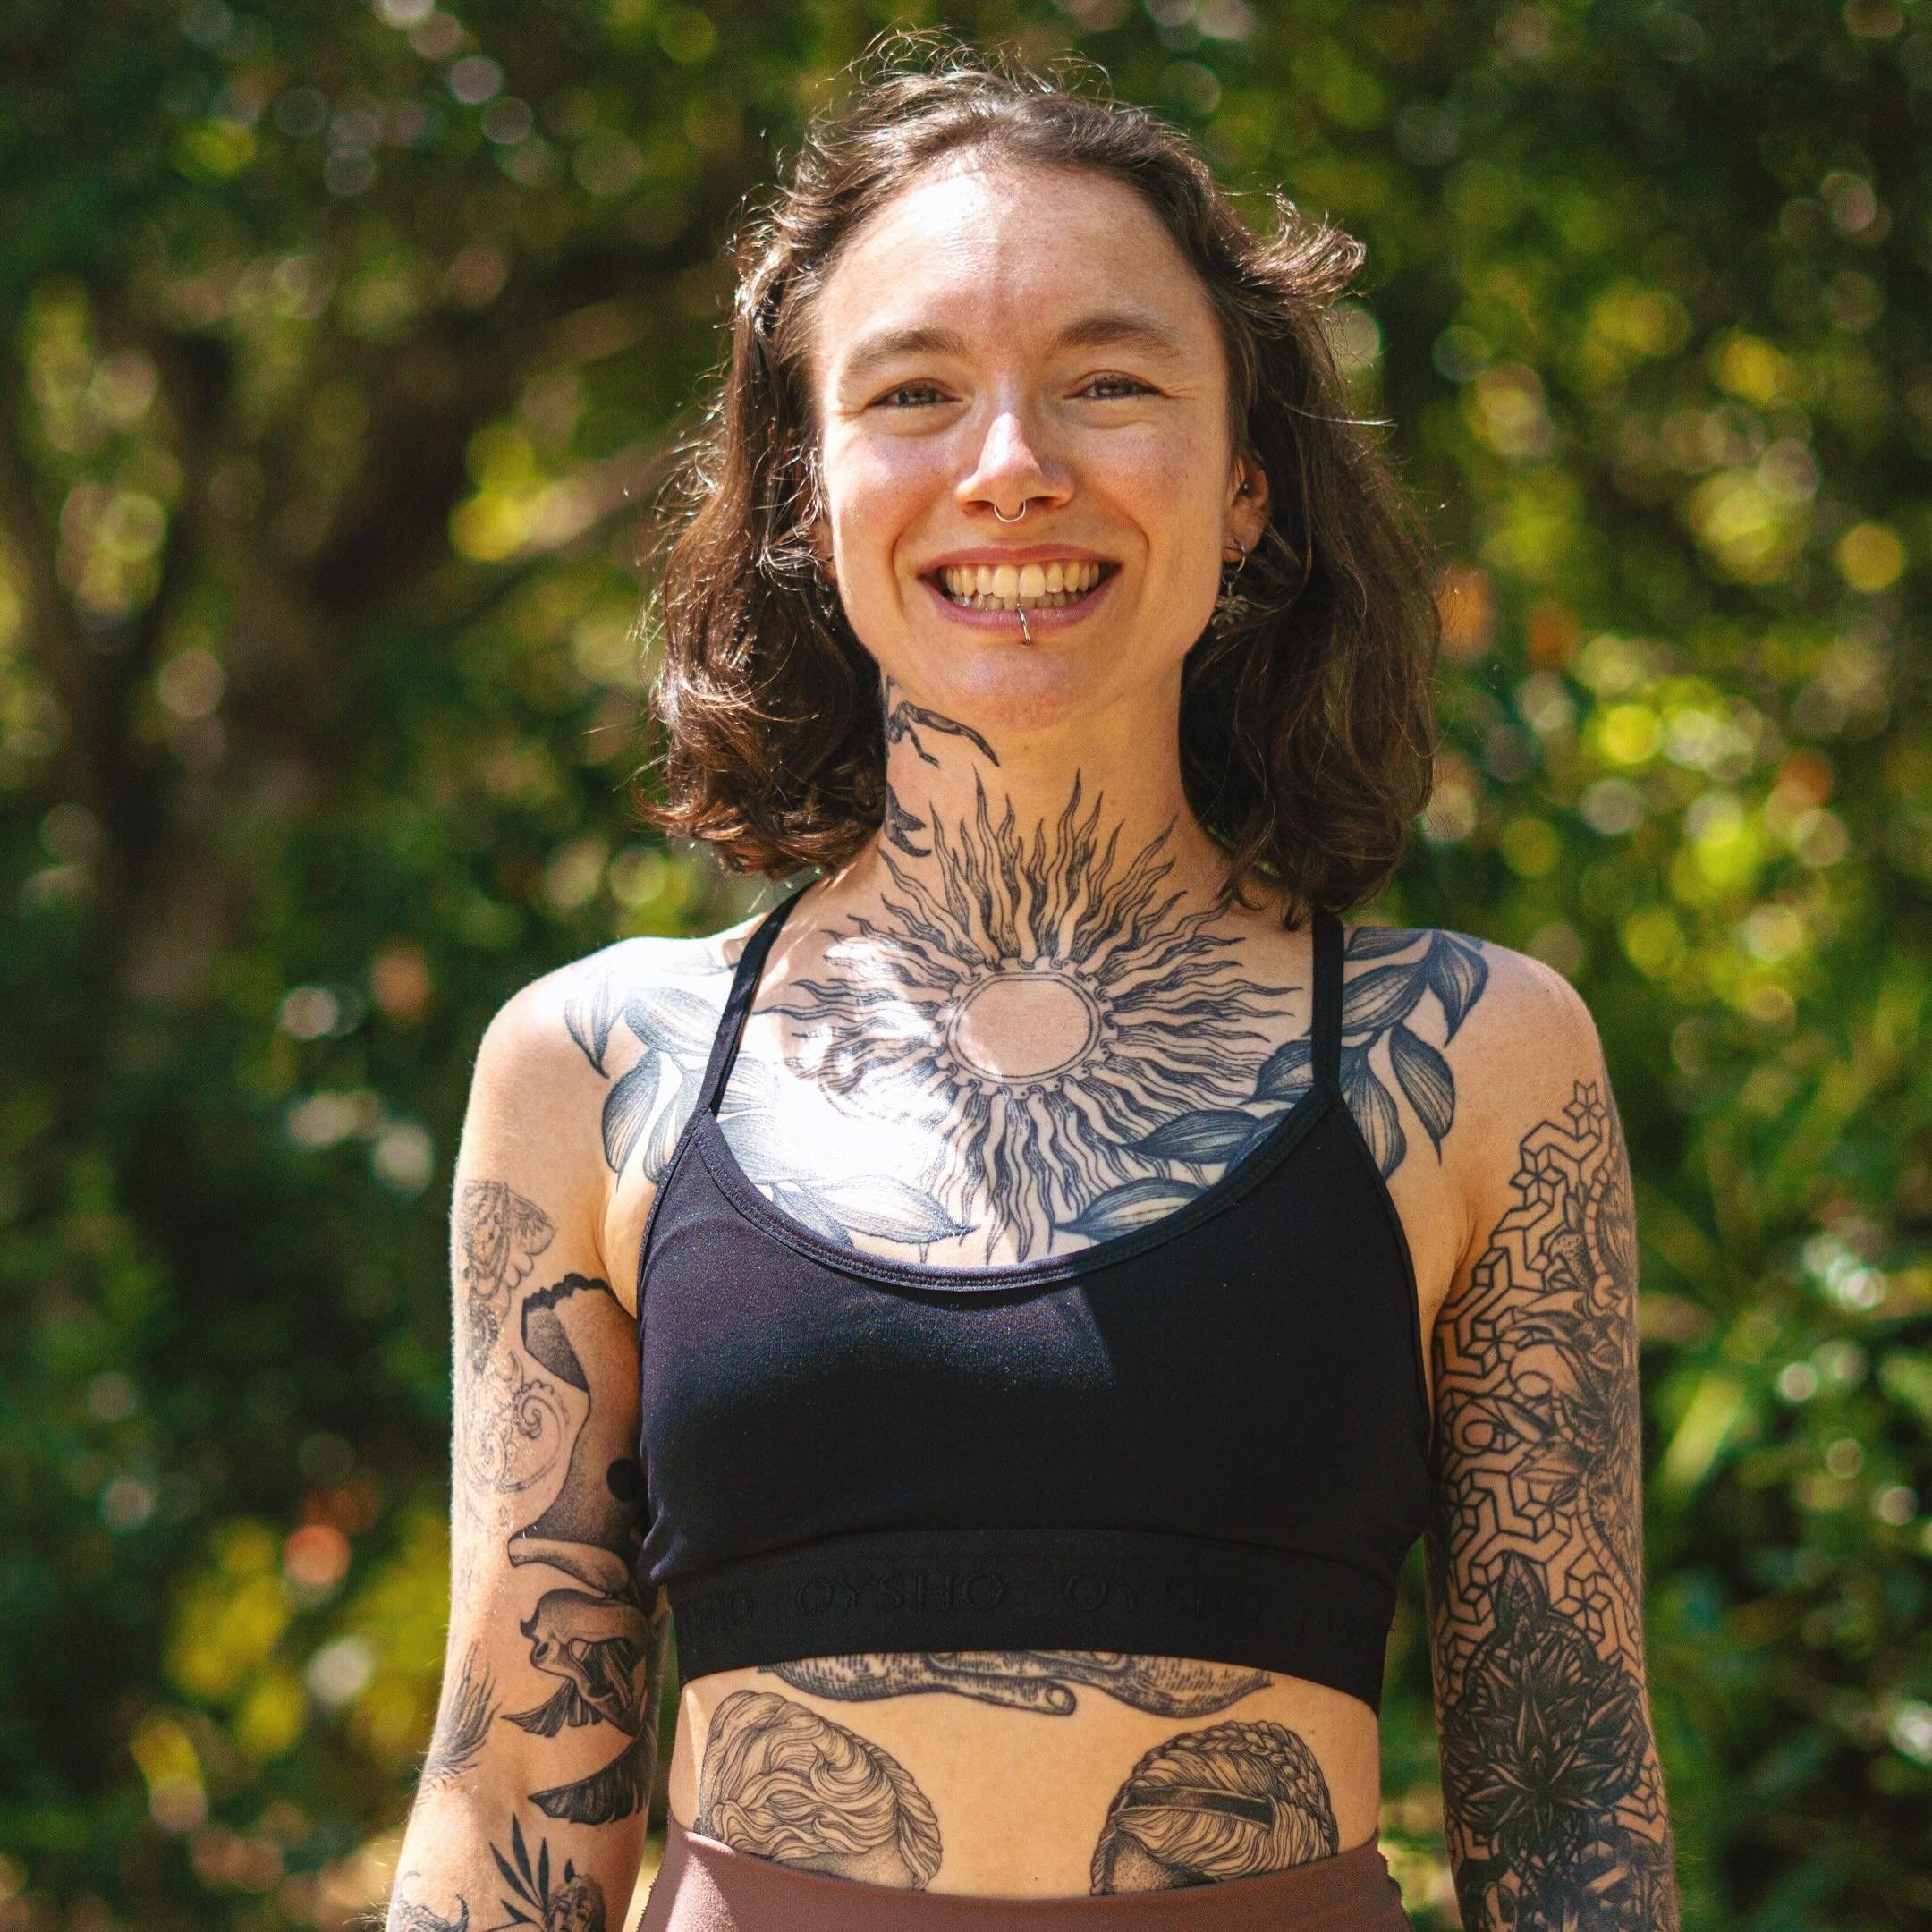 Remember that today at 17:30 we are offering a FREE 60 min class with Isabelle W.! She&rsquo;ll teach Vinyasa Flow Level 1 ✨

Come and enjoy your Saturday afternoon &hearts;️🙃